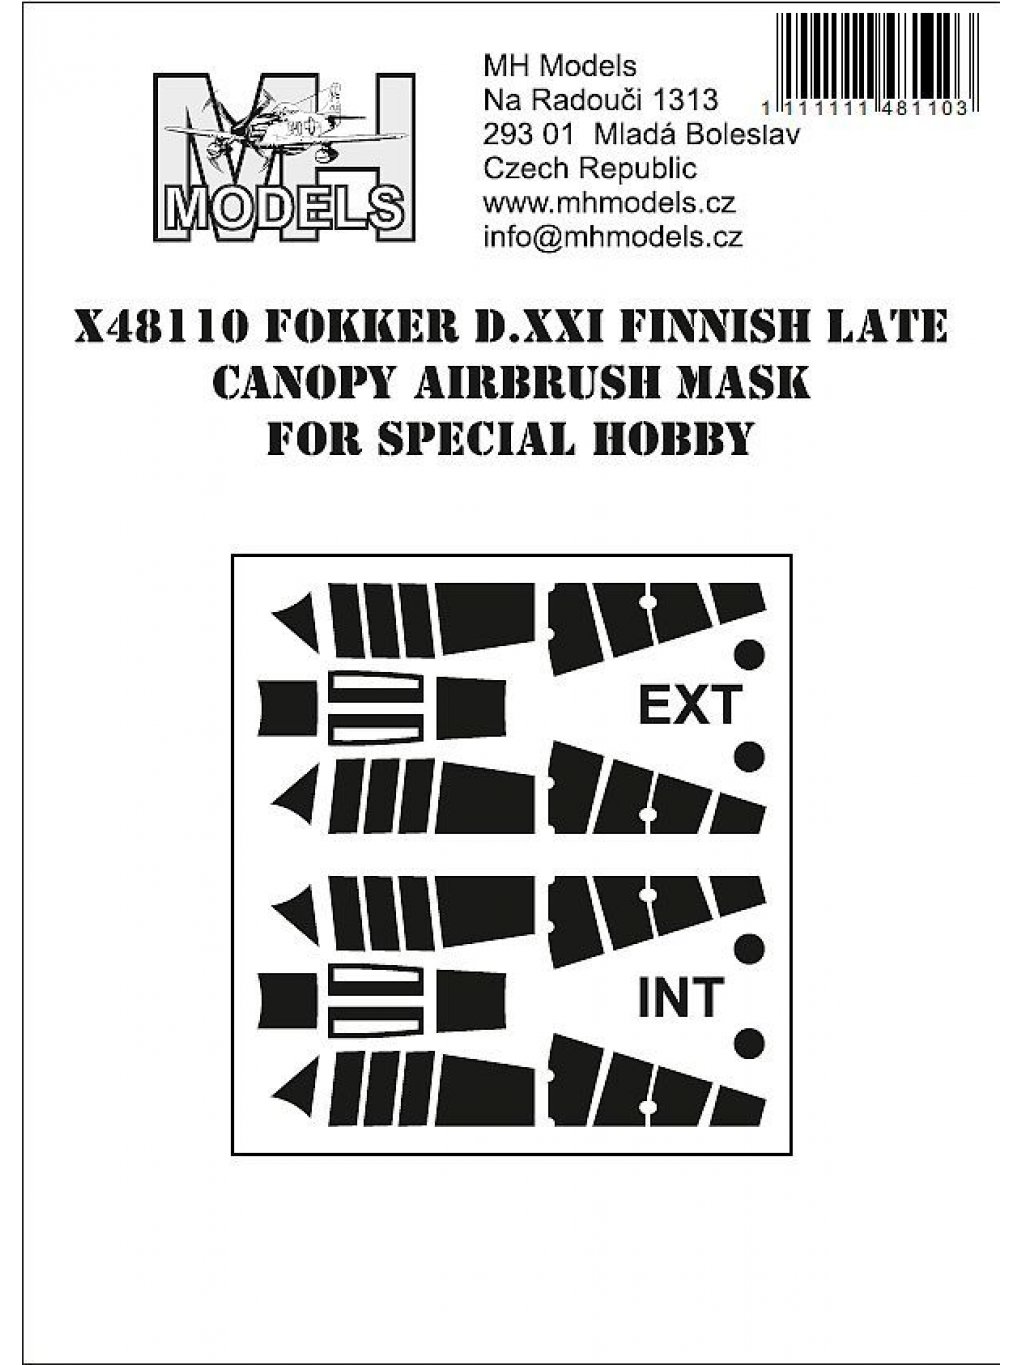 Fokker D.XXI Finnish late canopy airbrush mask for Special Hobby.